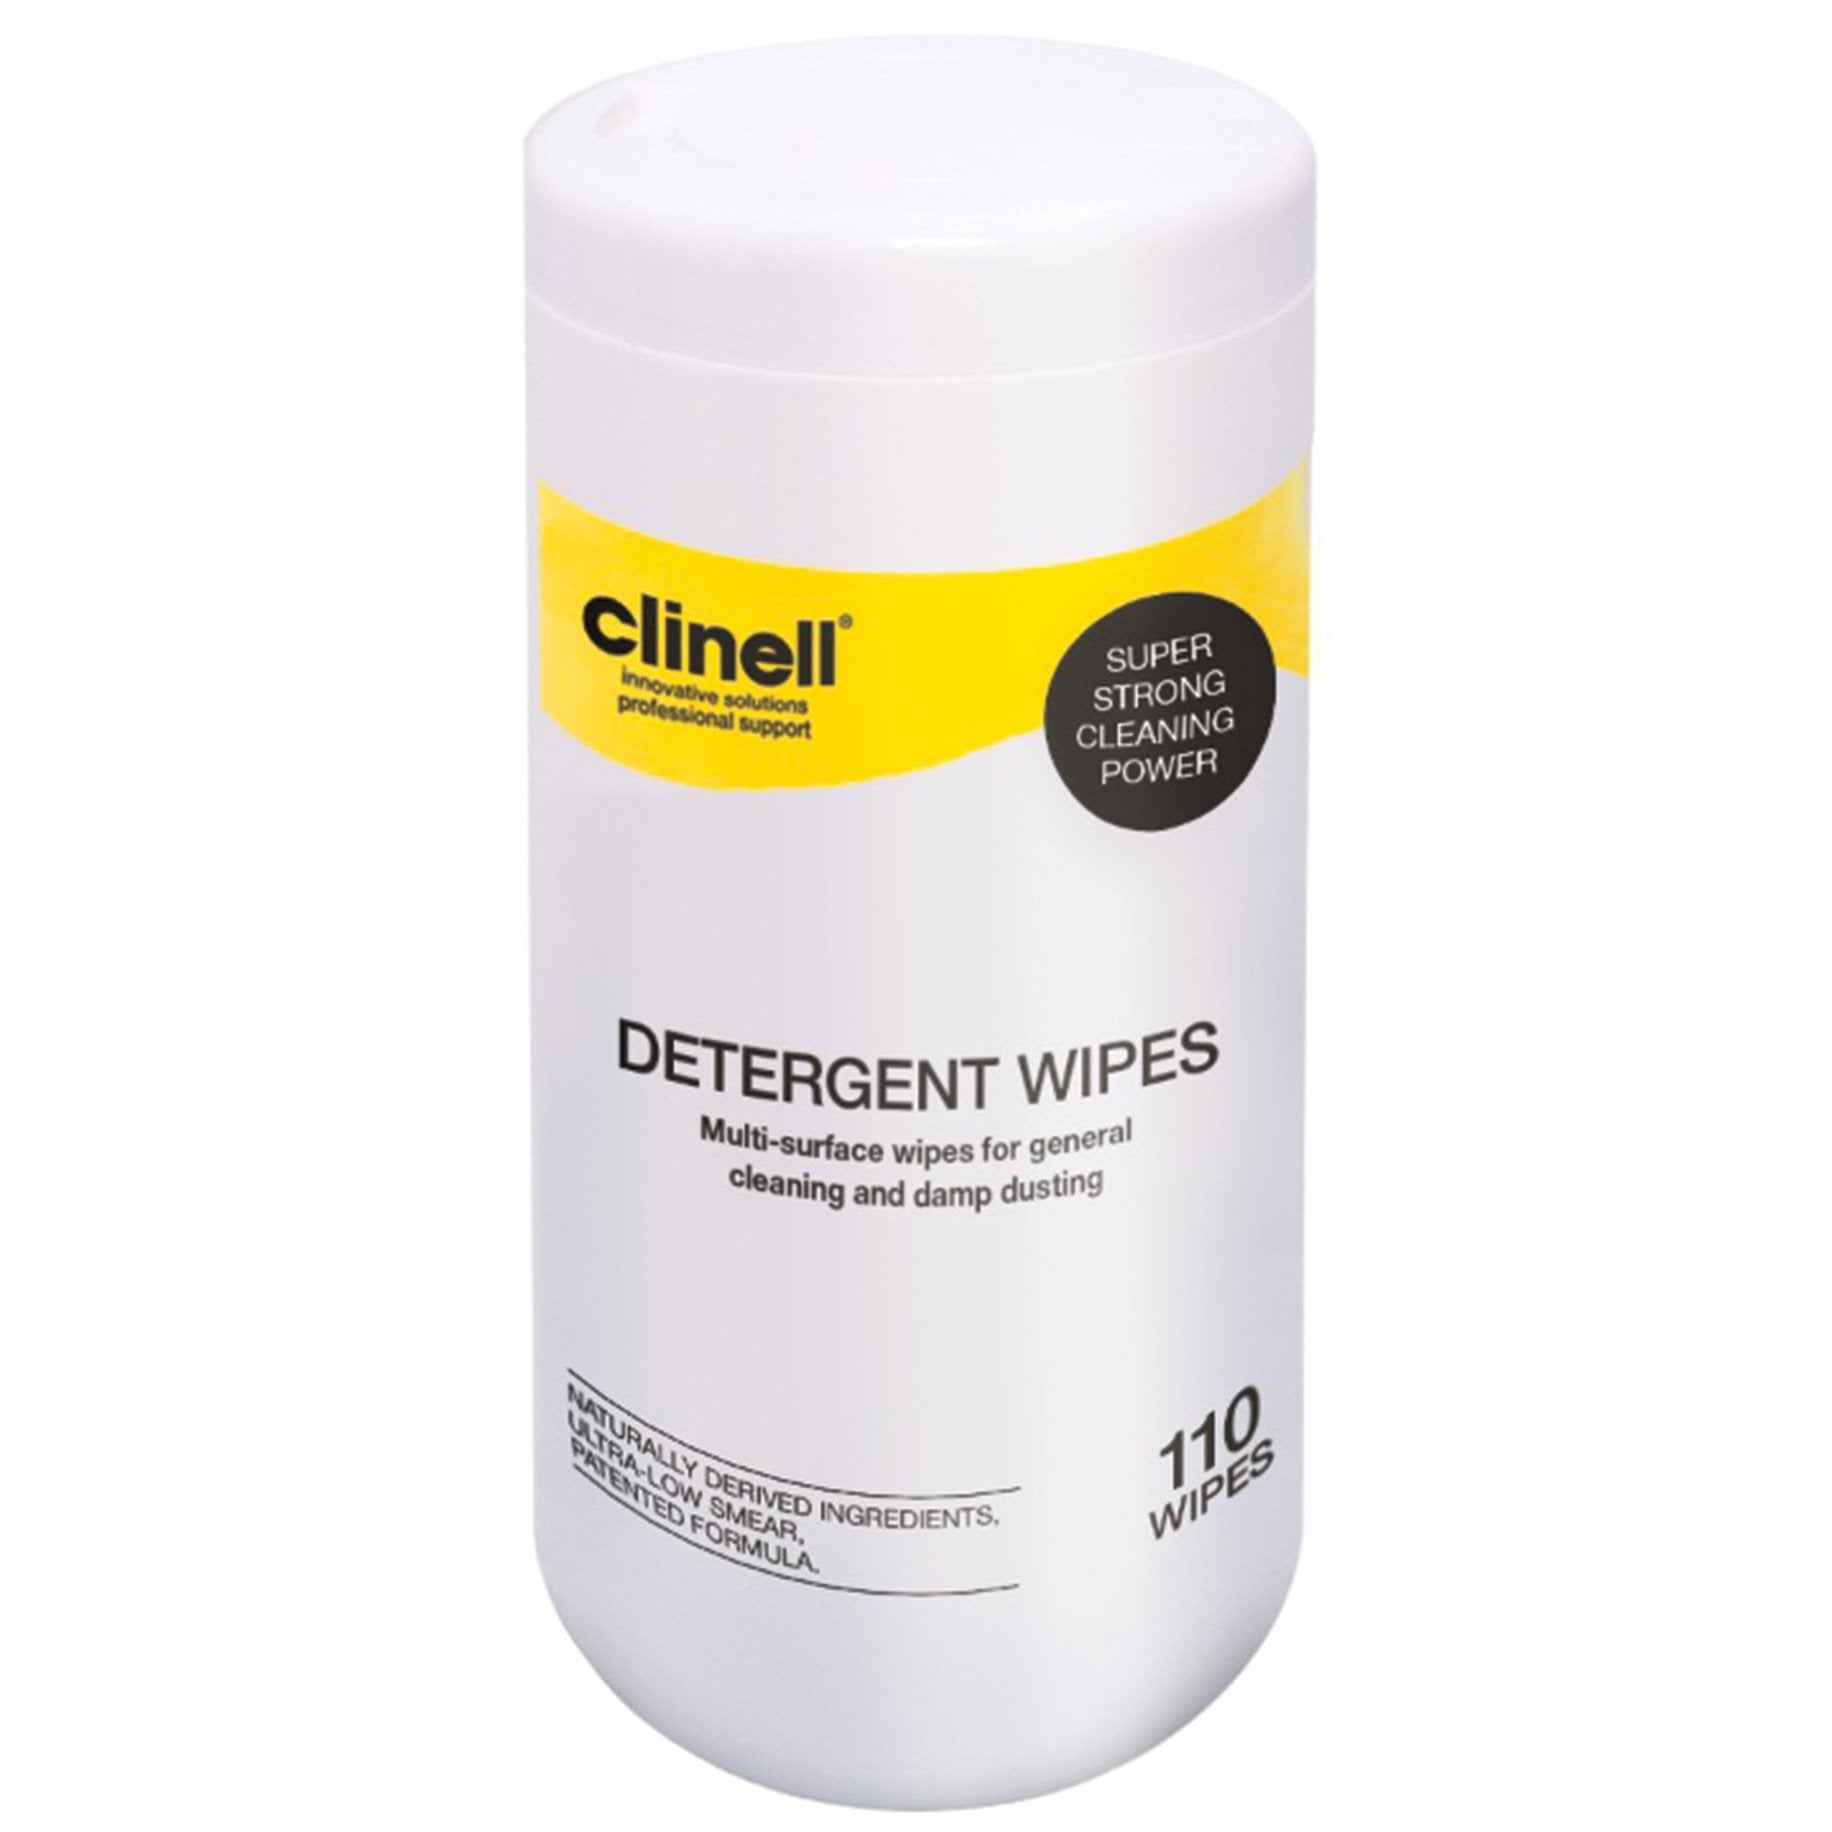 Clinell Detergent Wipes